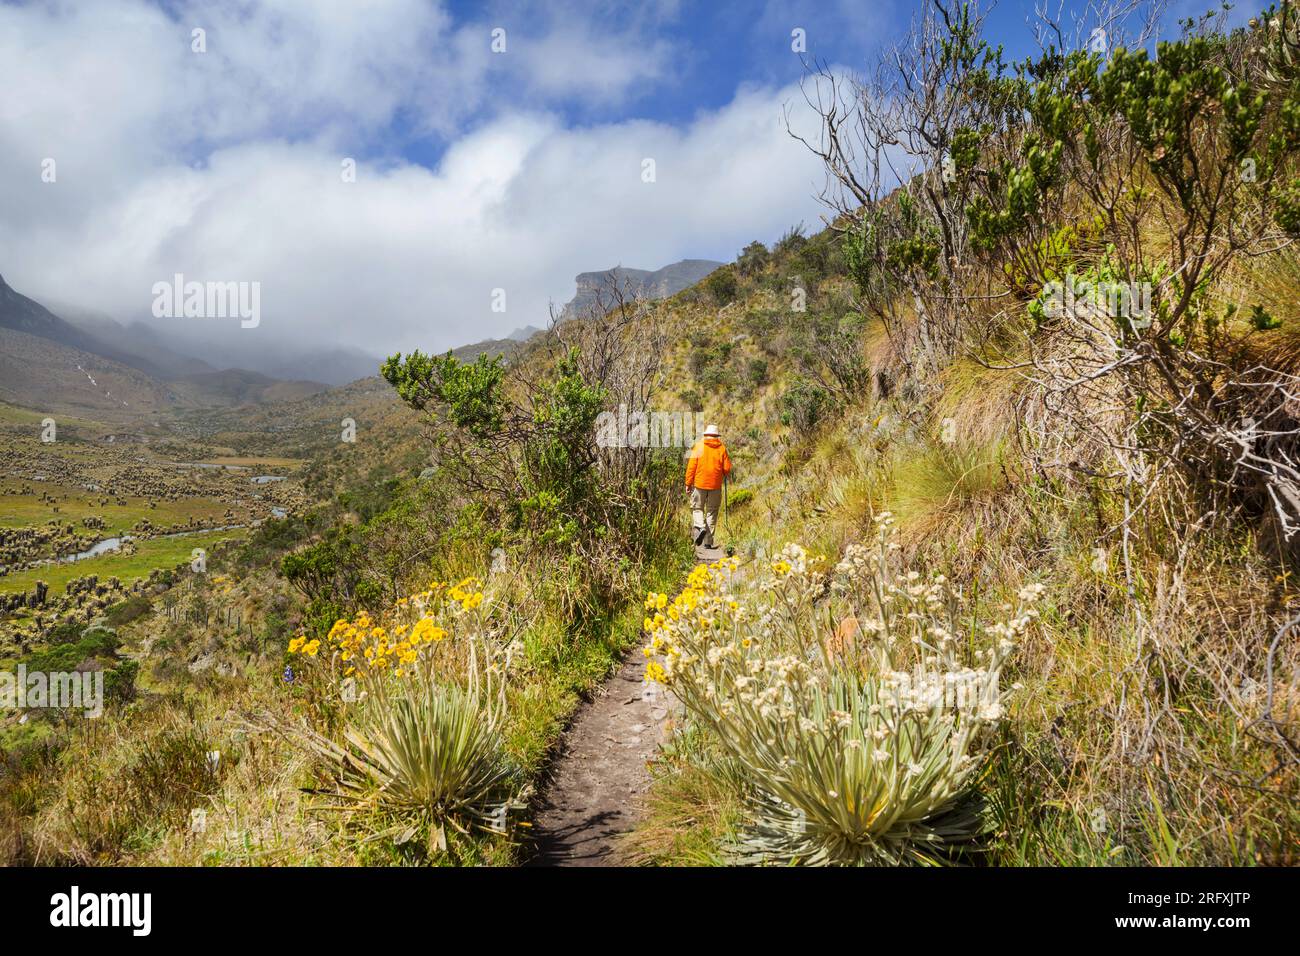 Hiker in high mountains in Colombia, South America Stock Photo